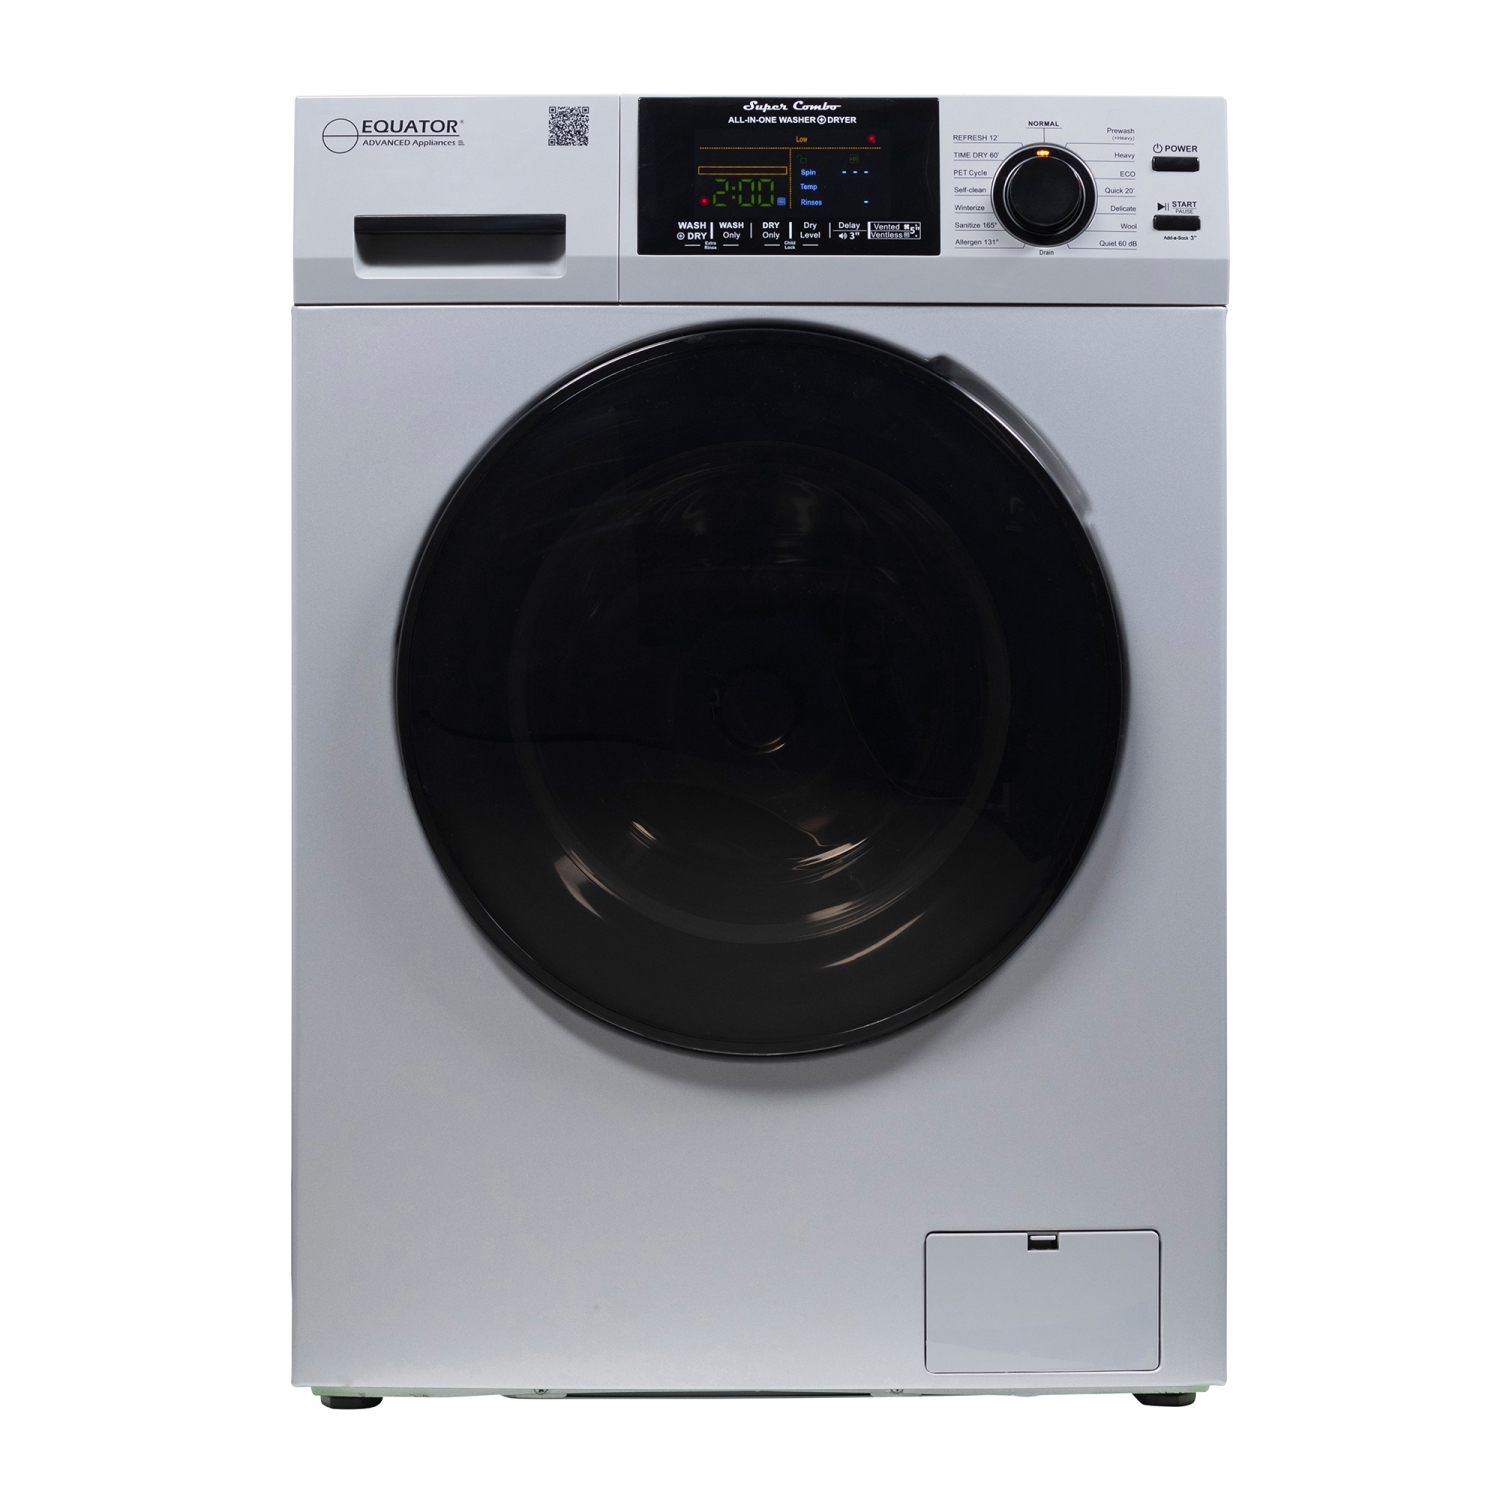 Equator All-in-One Washer Dryer VENTLESS/VENTED PET cycle 1.62cf/15lbs 110V in Silver